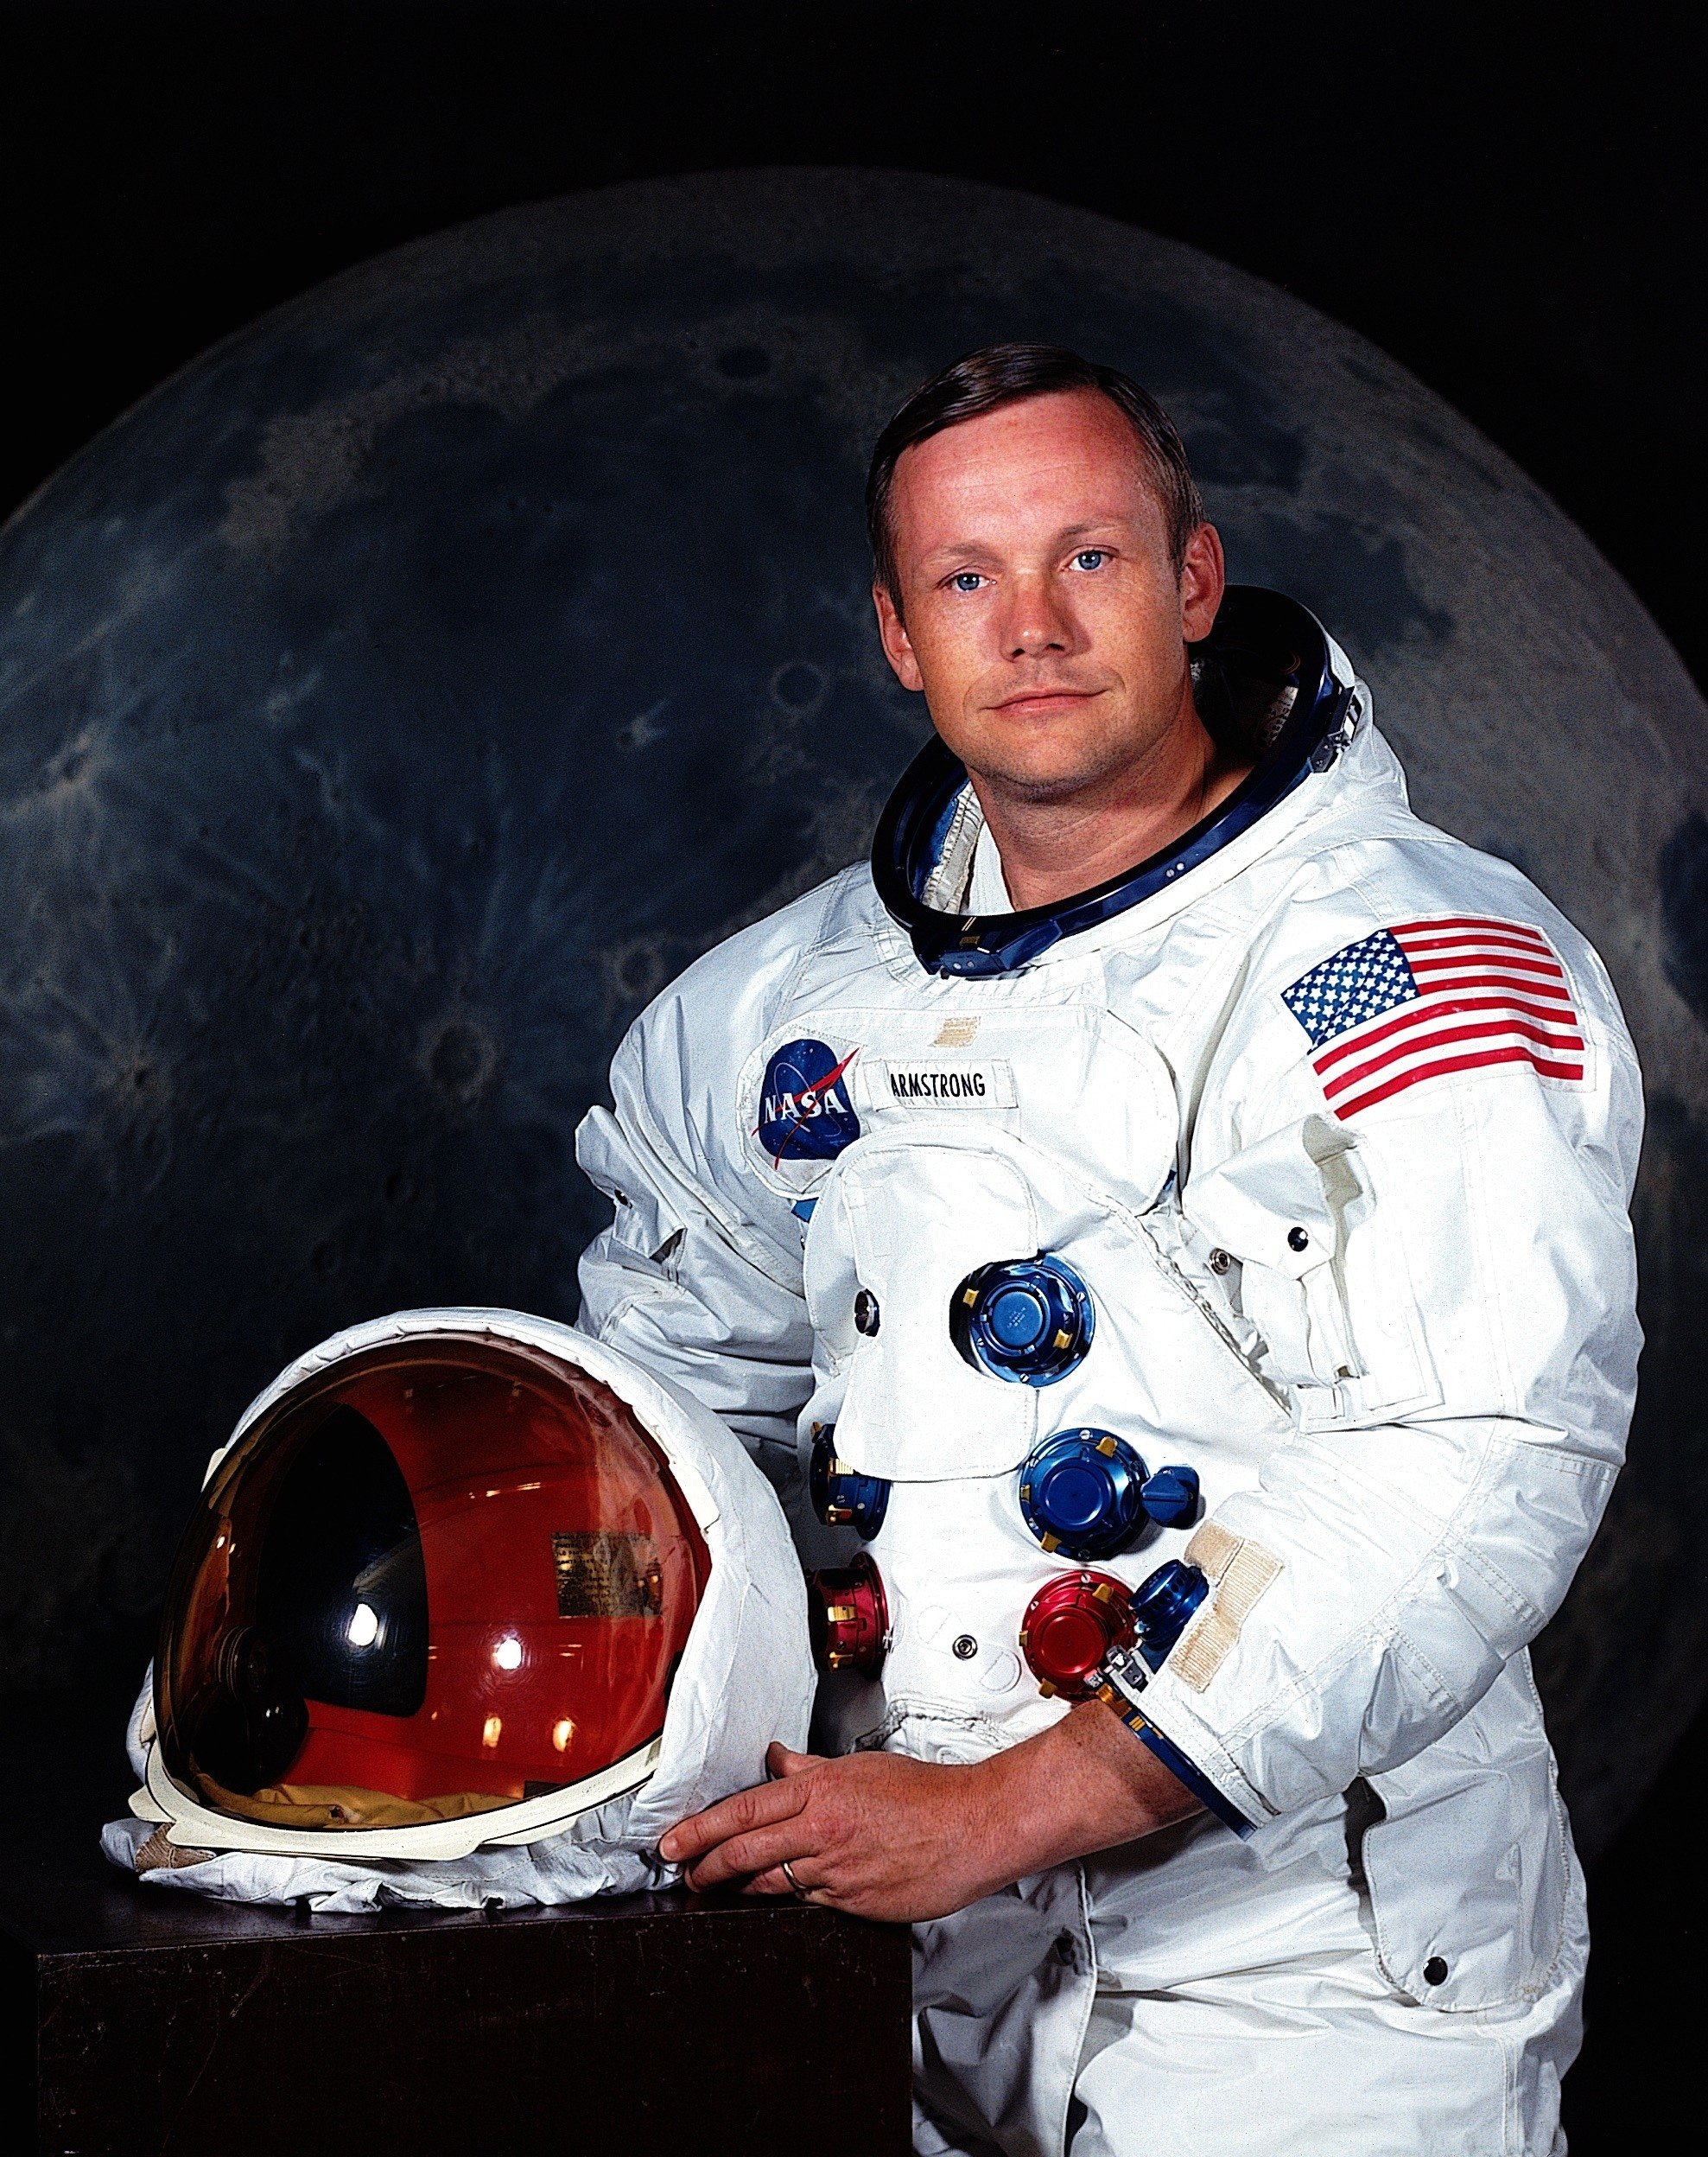 Iconic Photos of Neil Armstrong, the First Man on the Moon